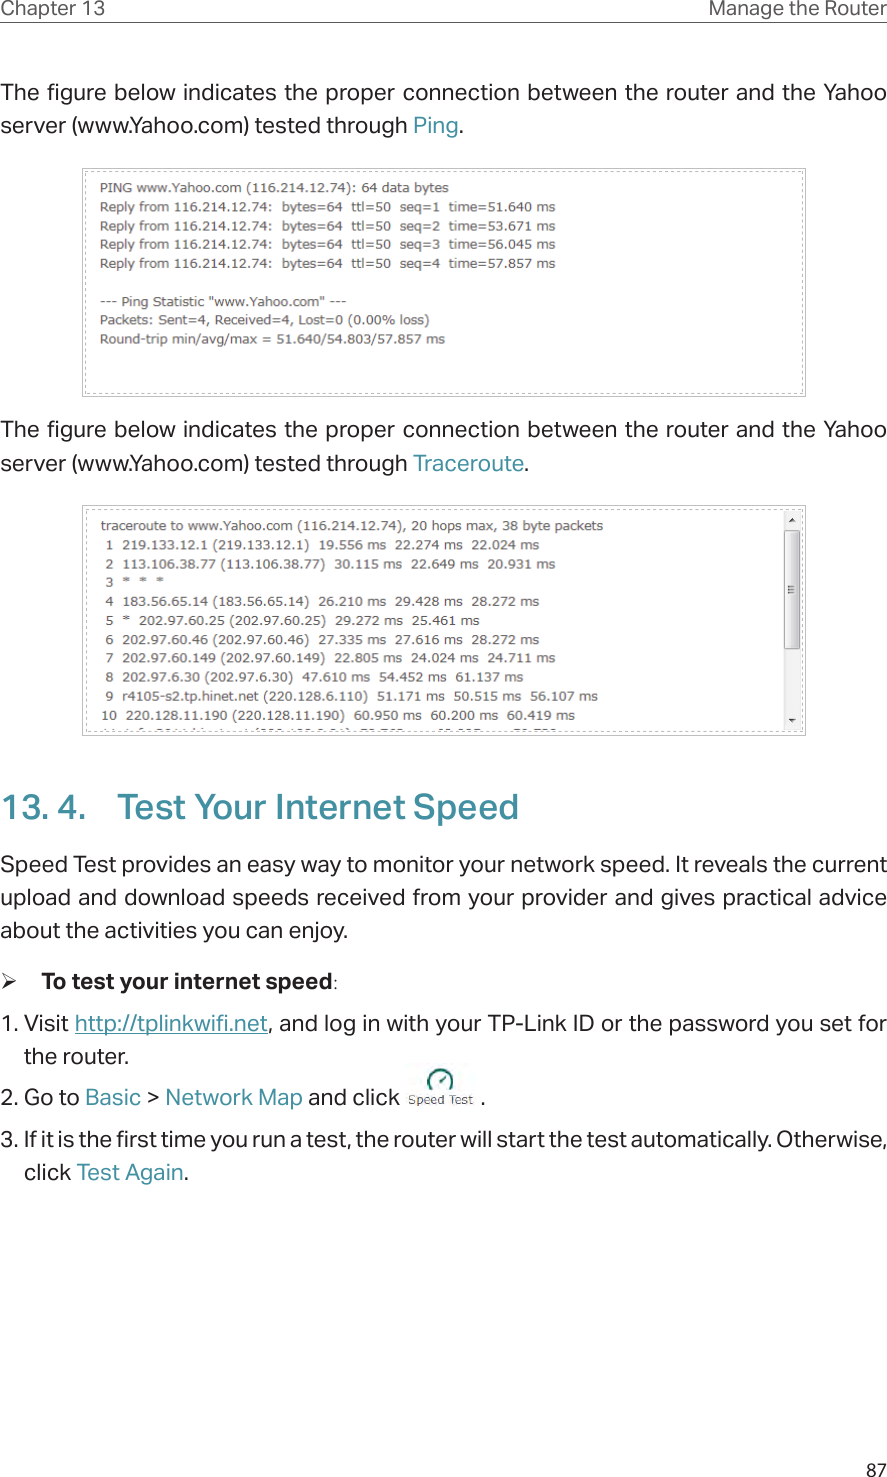 87Chapter 13 Manage the Router The figure below indicates the proper connection between the router and the Yahoo server (www.Yahoo.com) tested through Ping. The figure below indicates the proper connection between the router and the Yahoo server (www.Yahoo.com) tested through Traceroute.13. 4.  Test Your Internet SpeedSpeed Test provides an easy way to monitor your network speed. It reveals the current upload and download speeds received from your provider and gives practical advice about the activities you can enjoy. ¾To test your internet speed:1. Visit http://tplinkwifi.net, and log in with your TP-Link ID or the password you set for the router.2. Go to Basic &gt; Network Map and click   .3. If it is the first time you run a test, the router will start the test automatically. Otherwise, click Test Again.